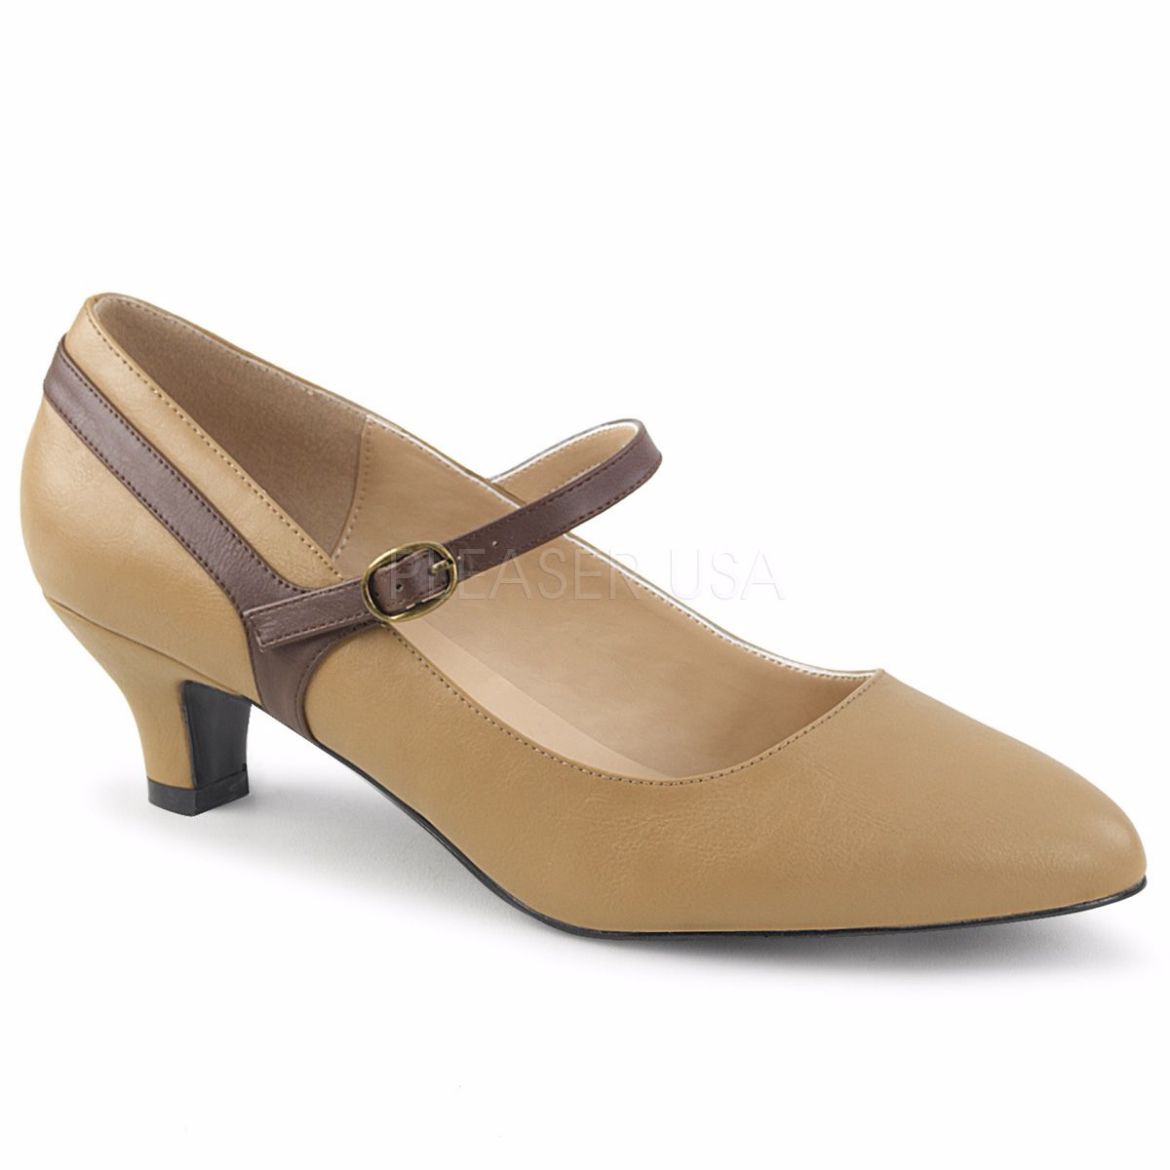 Product image of Pleaser Pink Label Fab-425 Tan-Brown Faux Leather, 2 inch (5.1 cm) Heel Court Pump Shoes